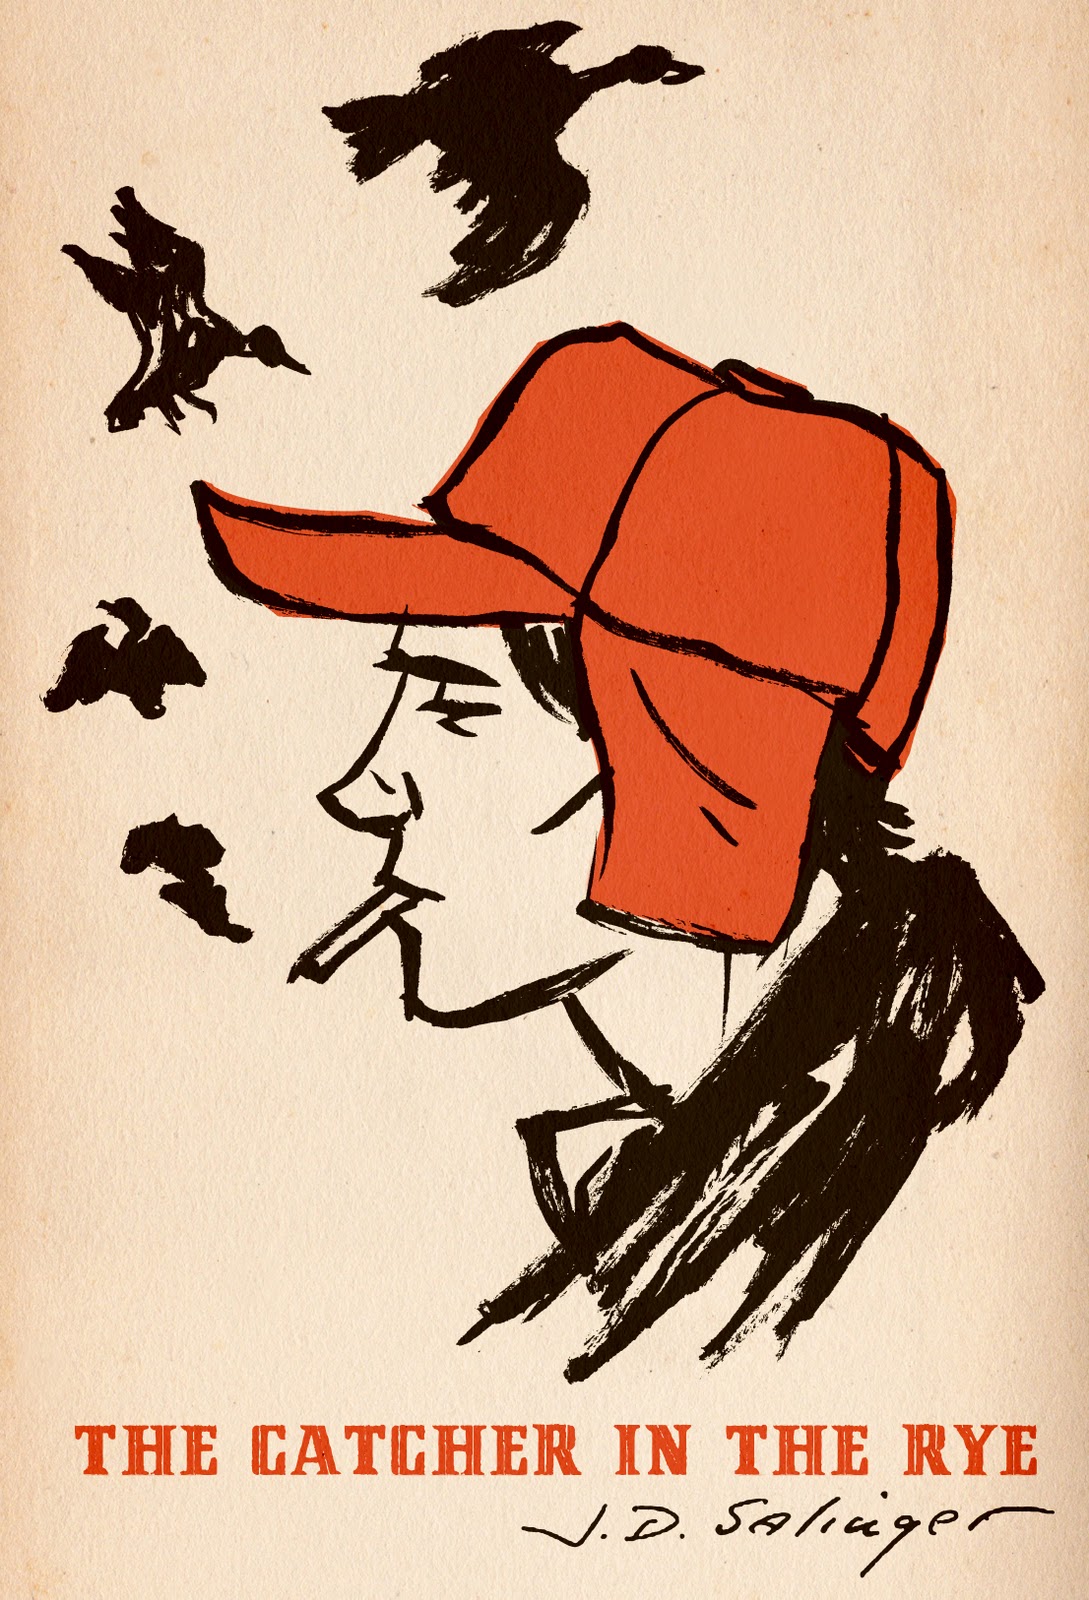 The Catcher in the Rye” by JD Salinger | BiblioLibros